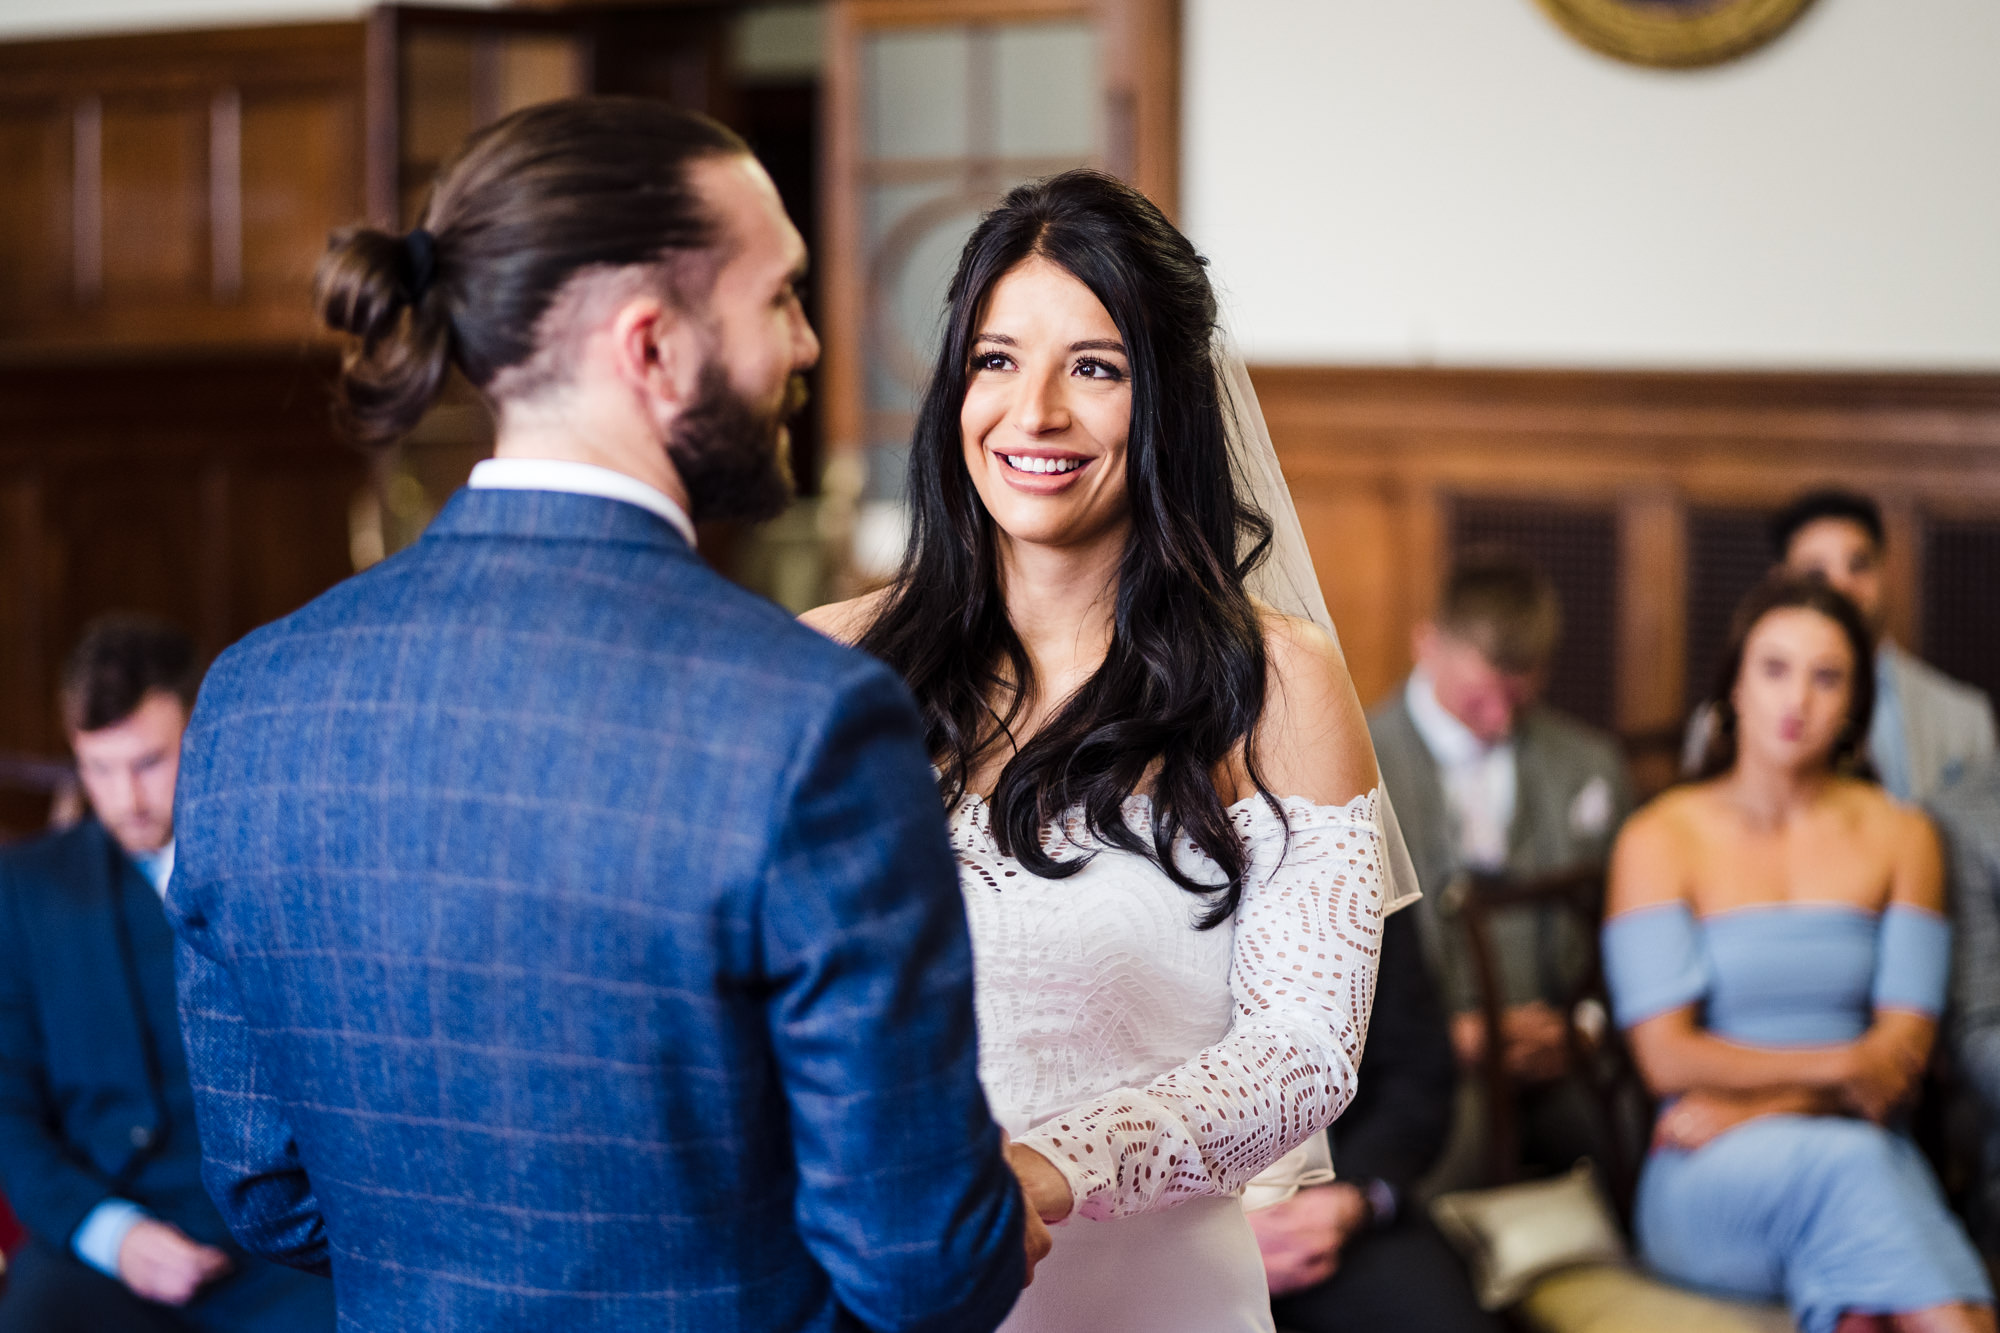 bride smiles and looks at groom during wedding ceremony at bath city guildhall